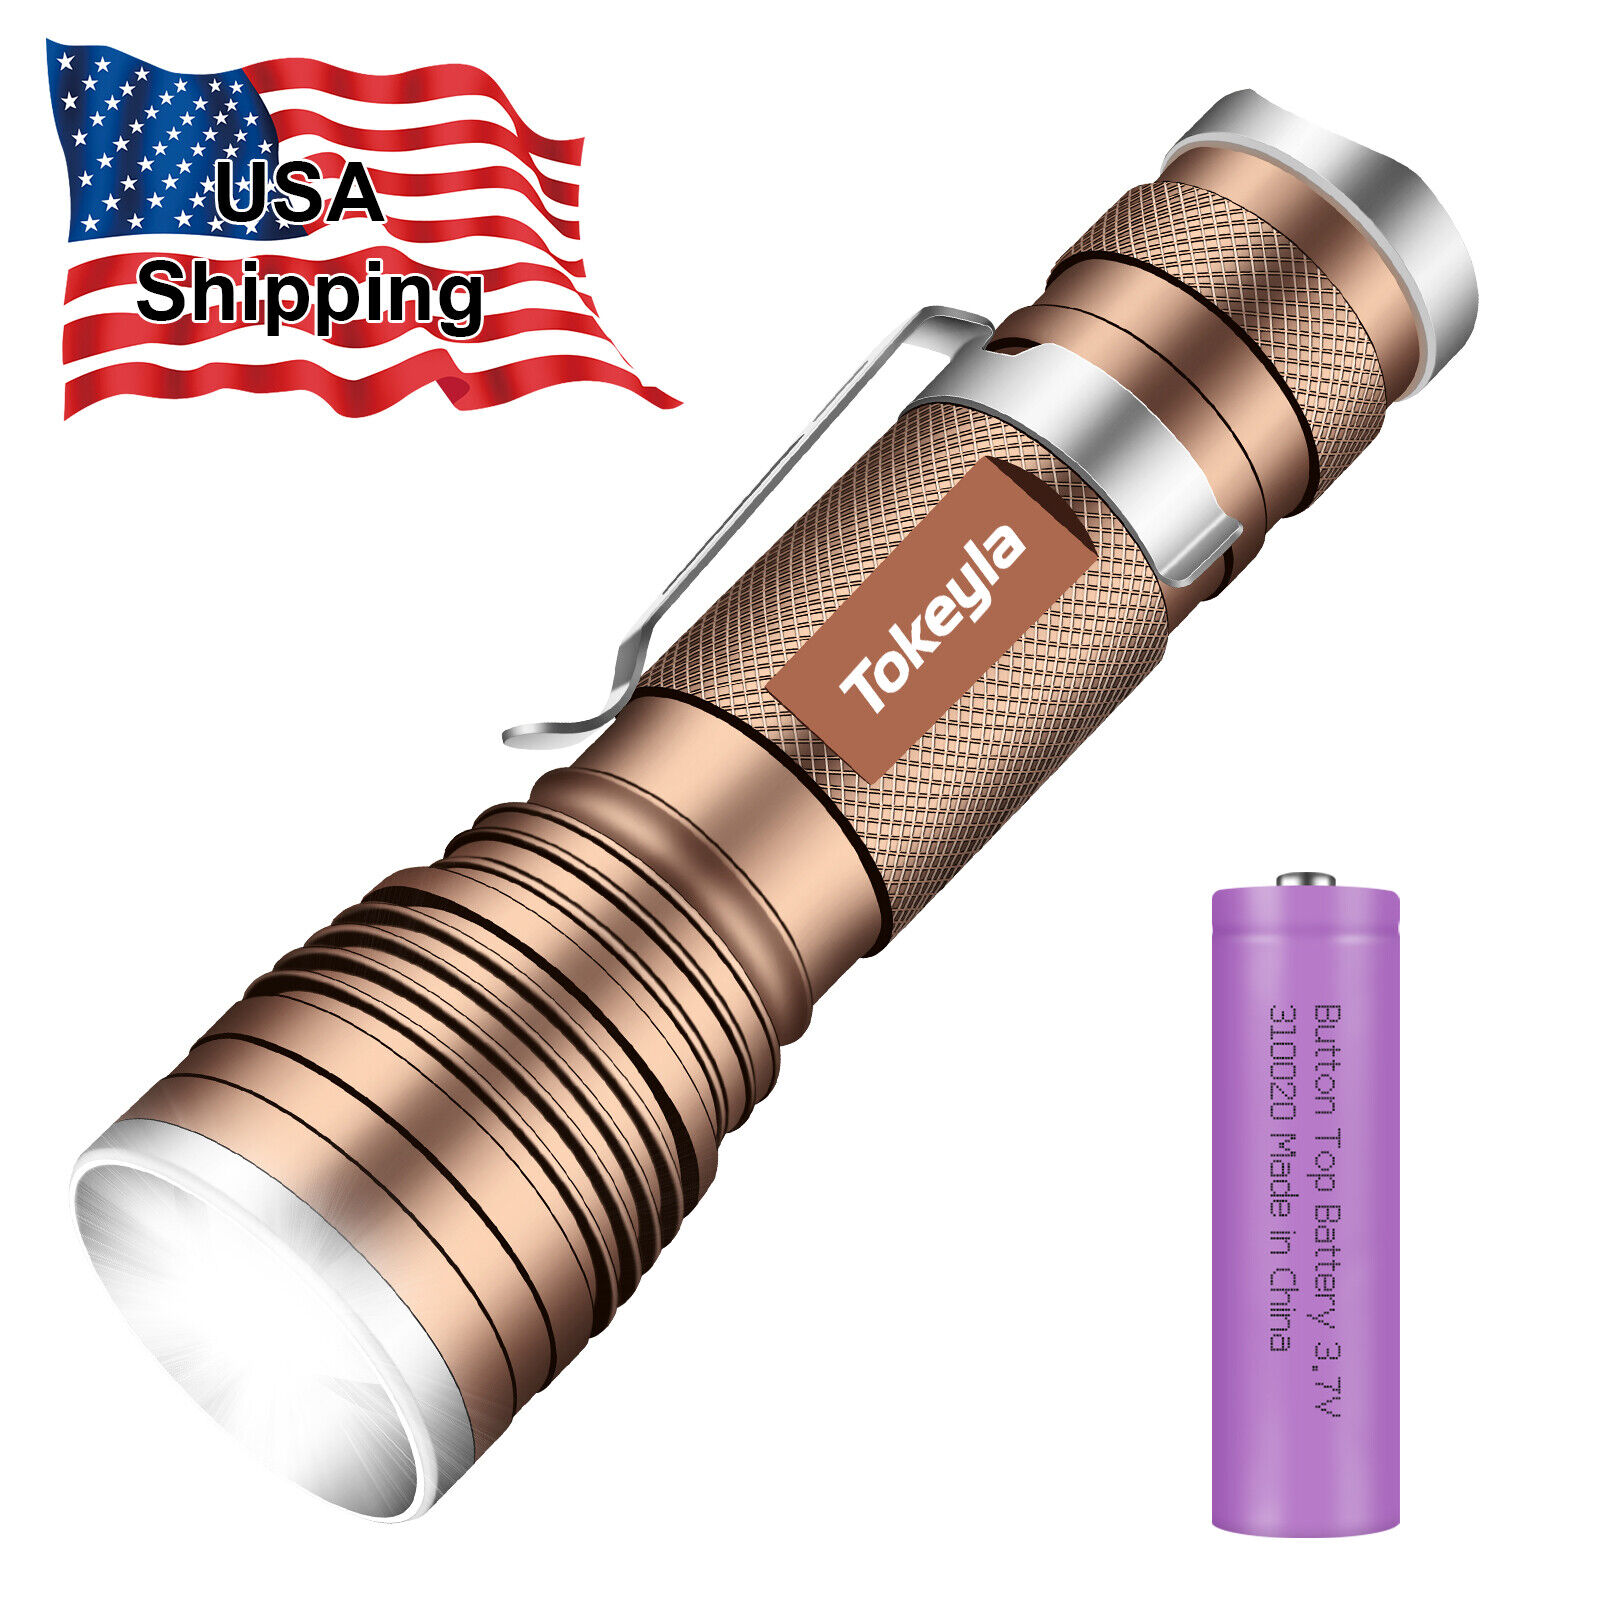 Super Bright LED Flashlight Rechargeable Zoomable Torch Light 5 Modes